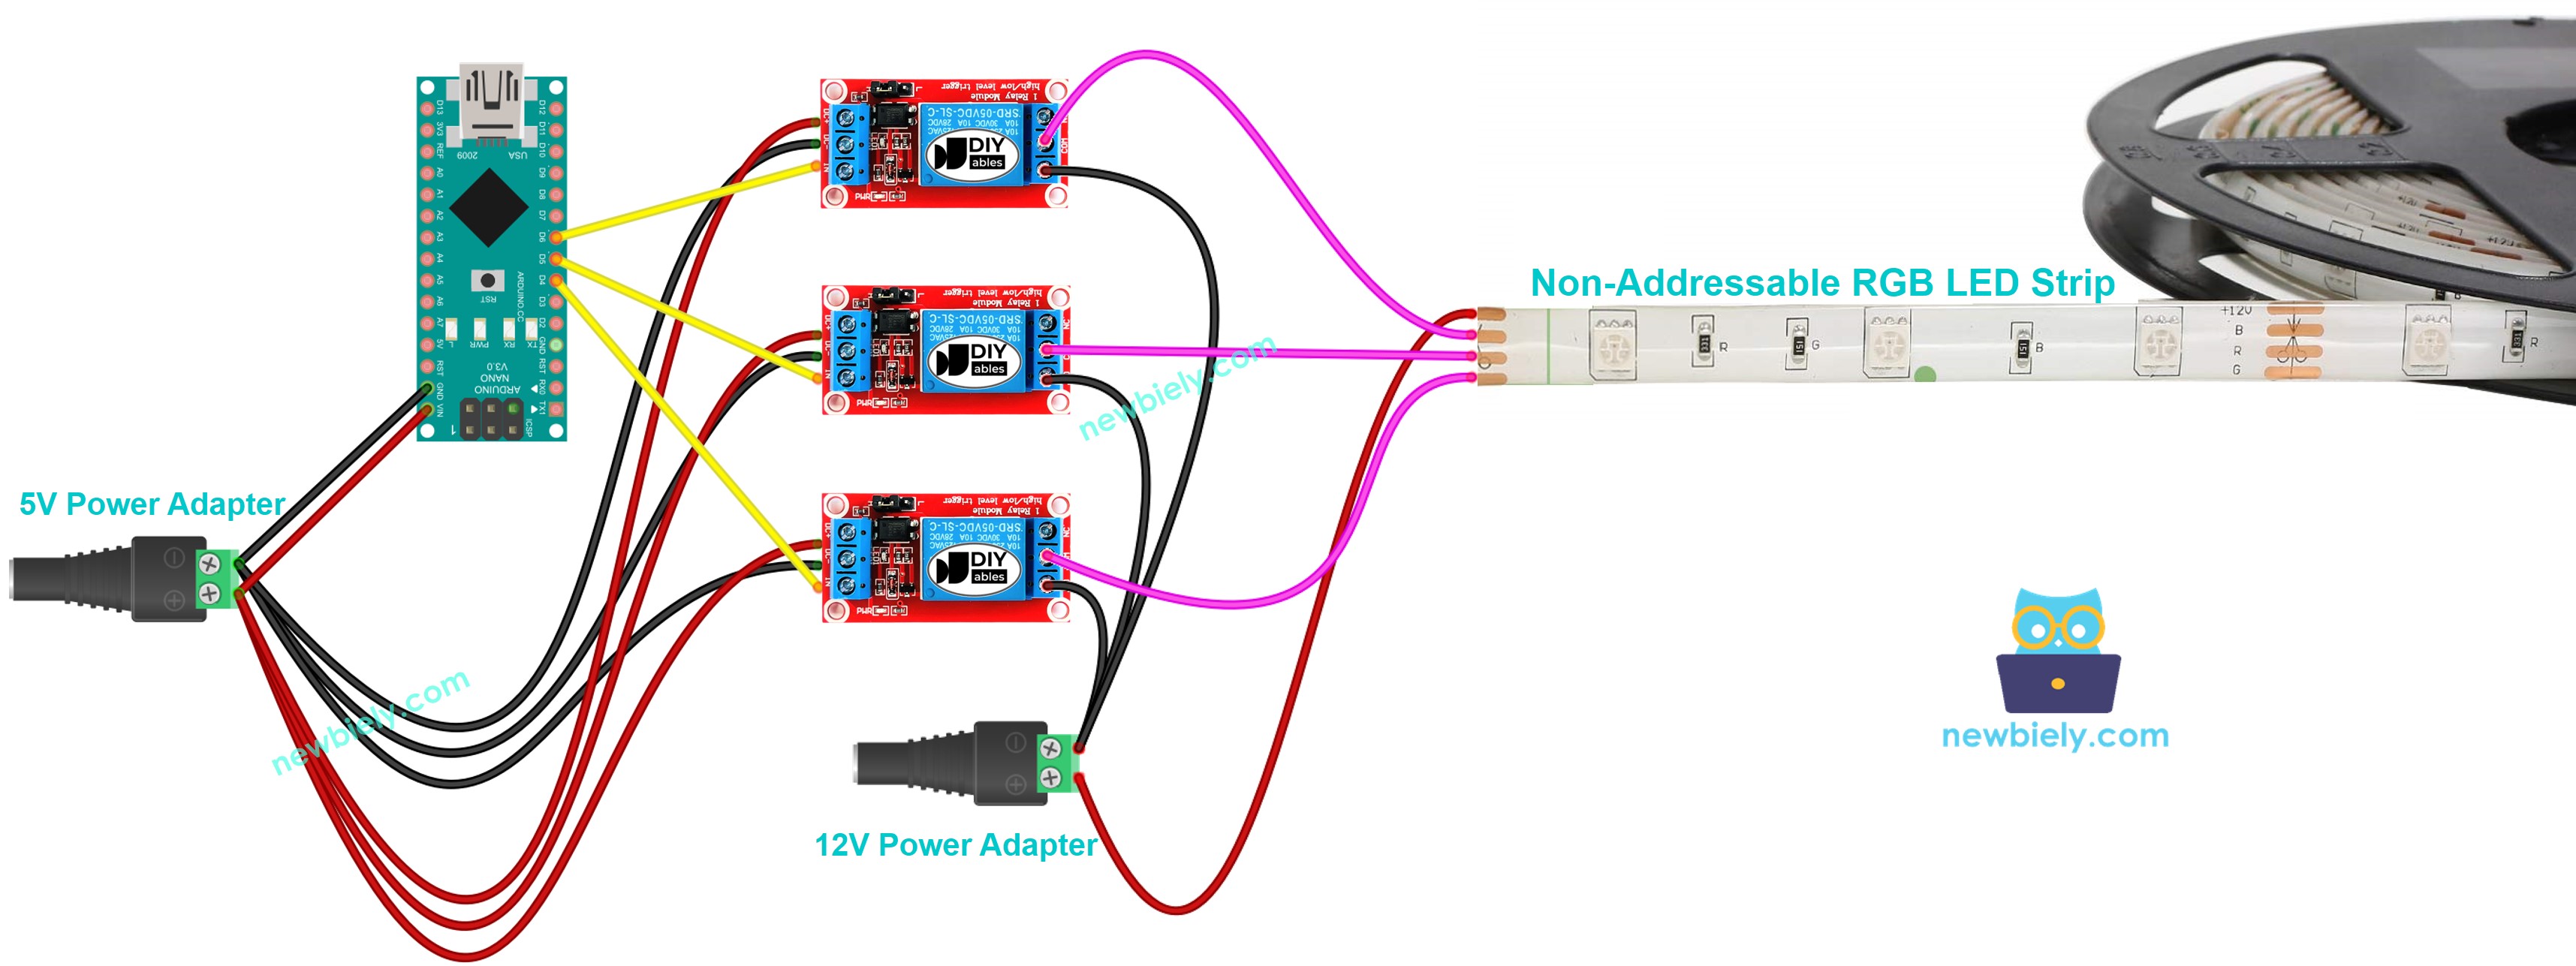 The wiring diagram between Arduino Nano and 12V LED strip